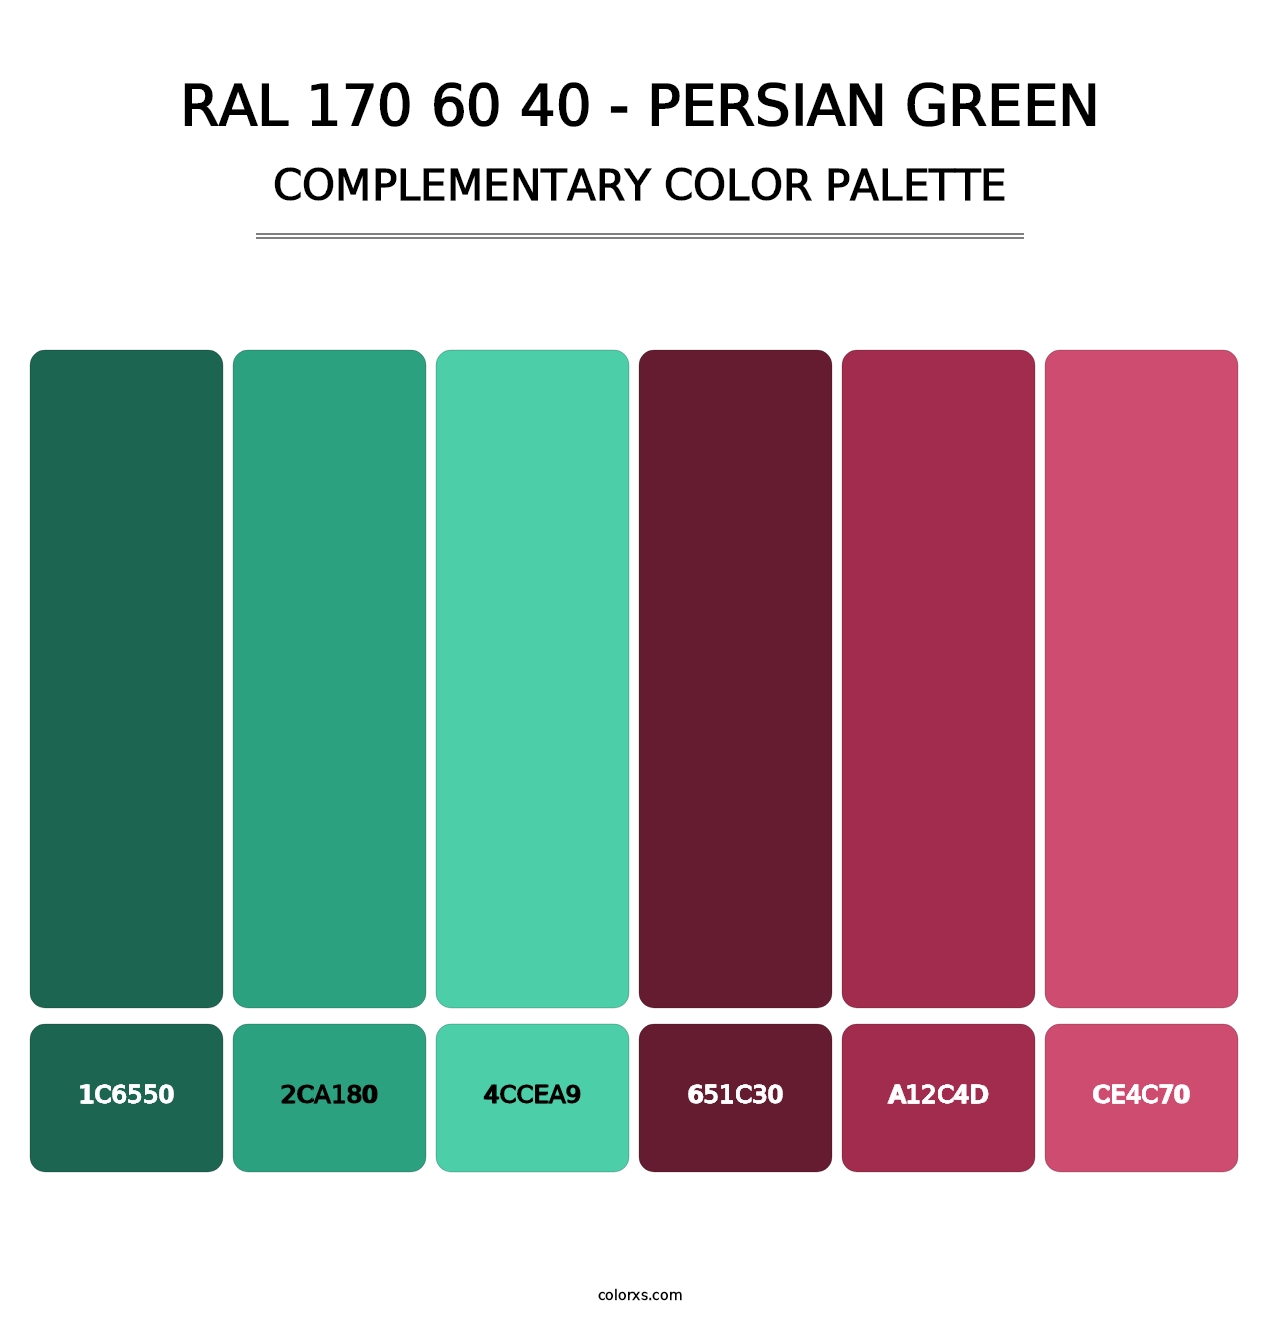 RAL 170 60 40 - Persian Green - Complementary Color Palette